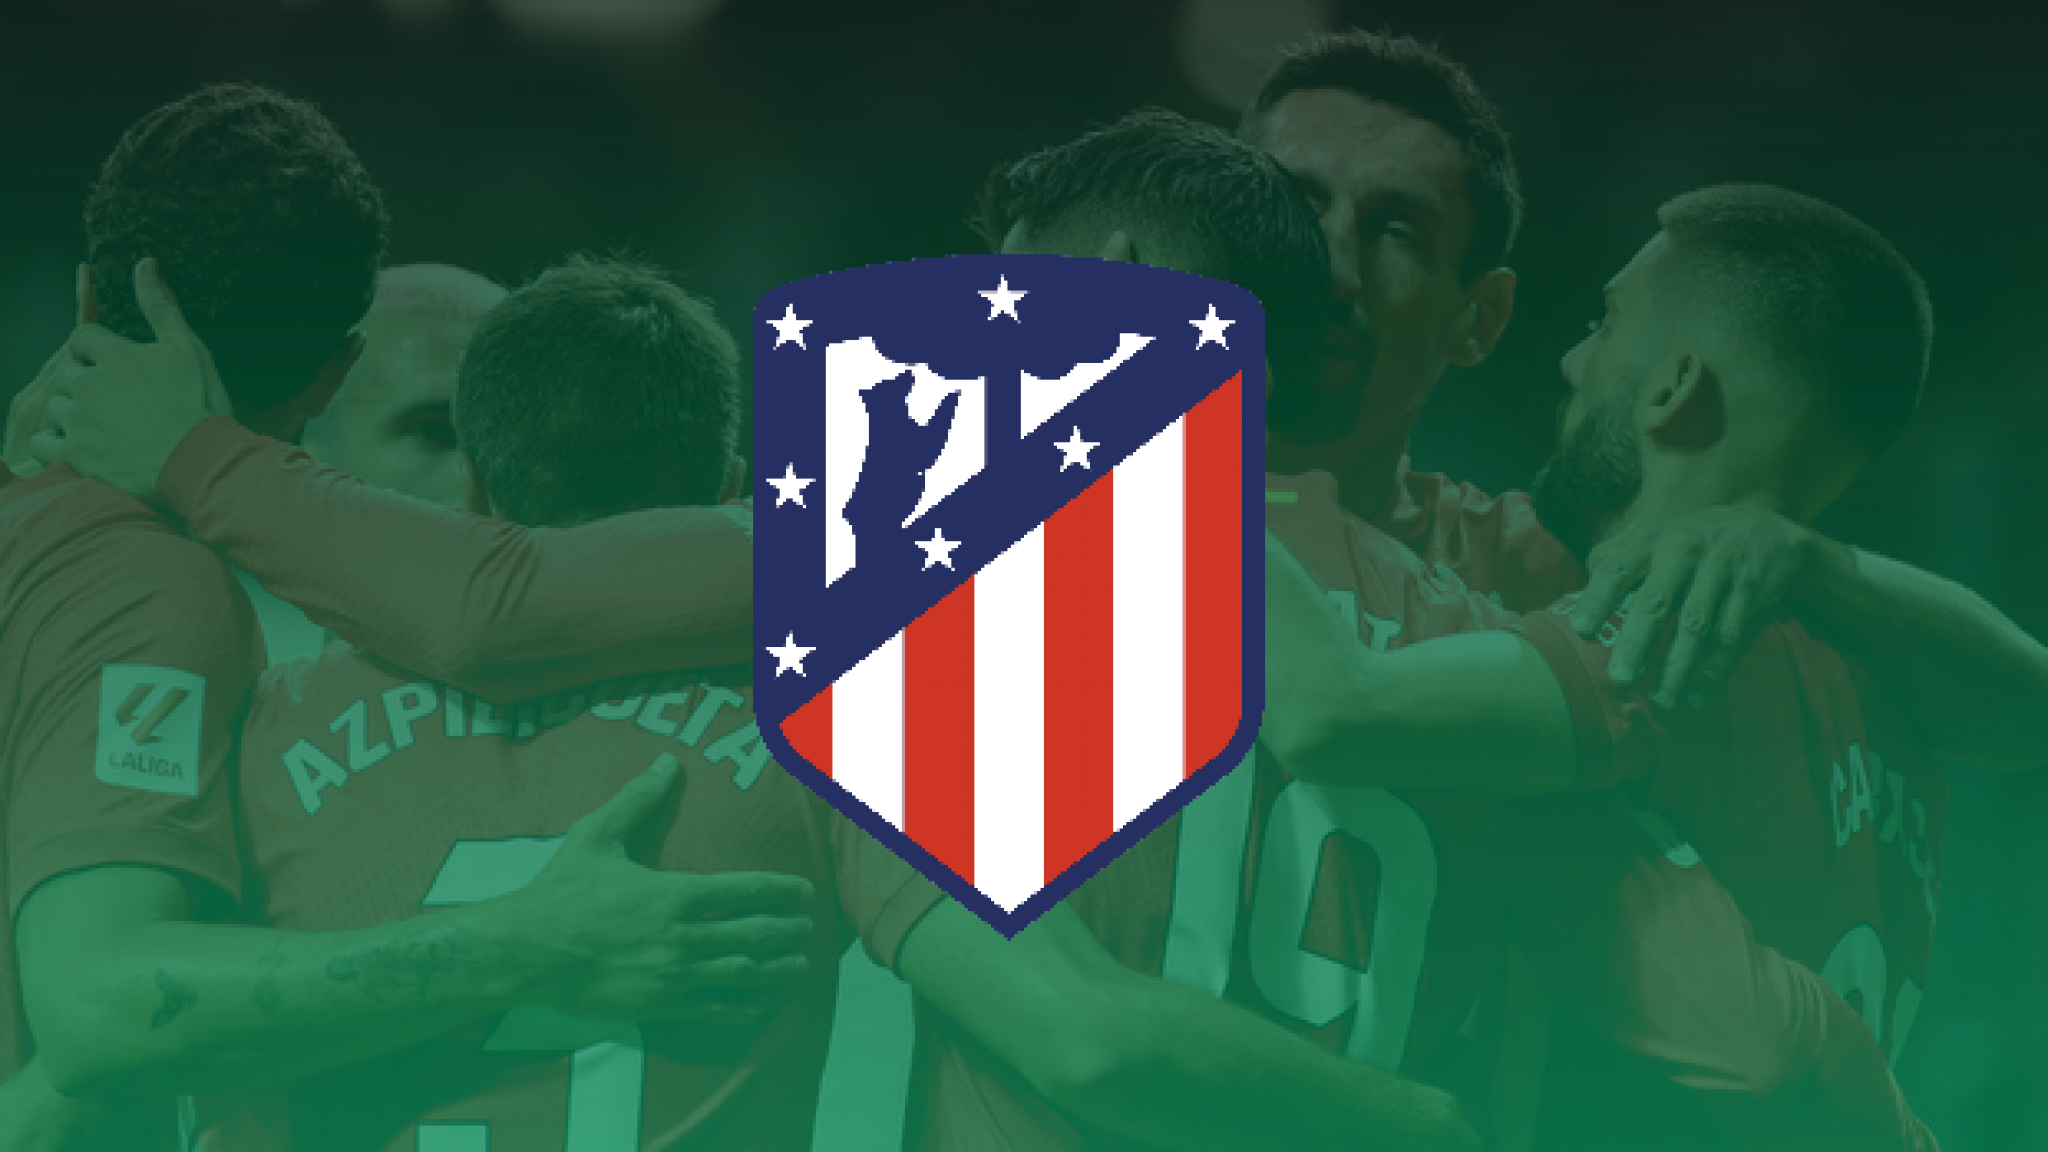 The history of Atlético Madrid